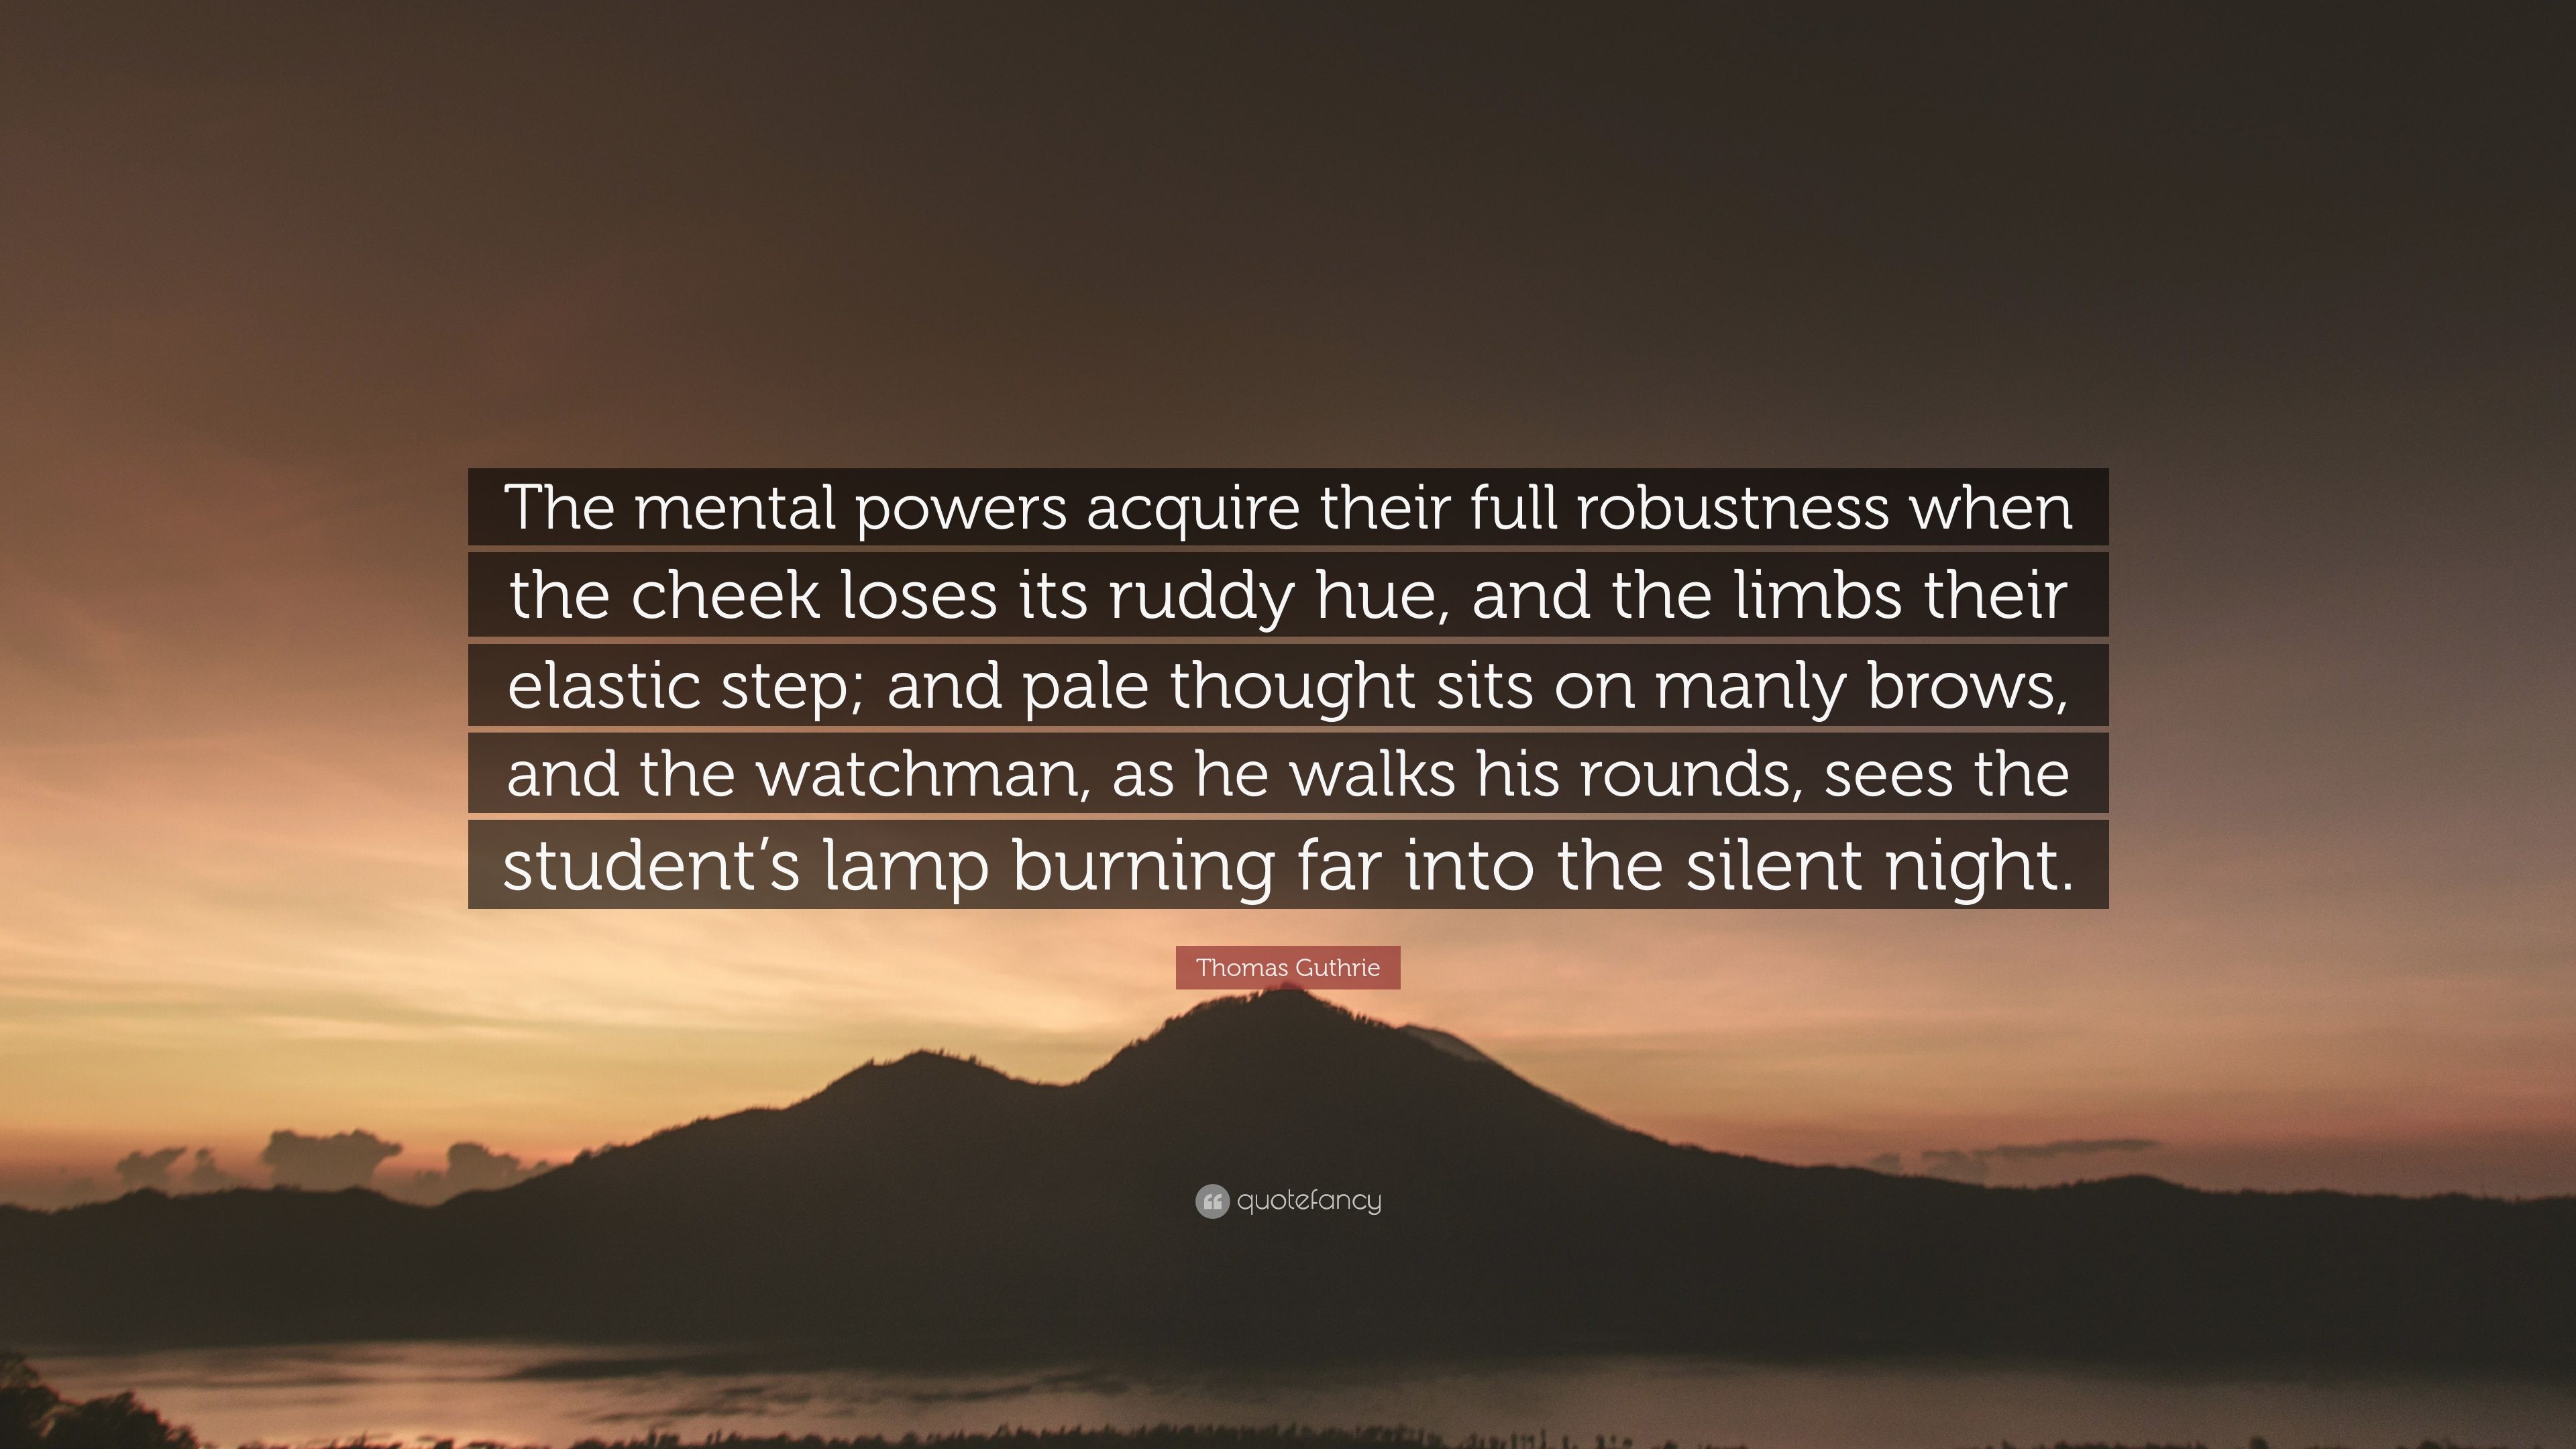 Thomas Guthrie Quote: “The mental powers acquire their full